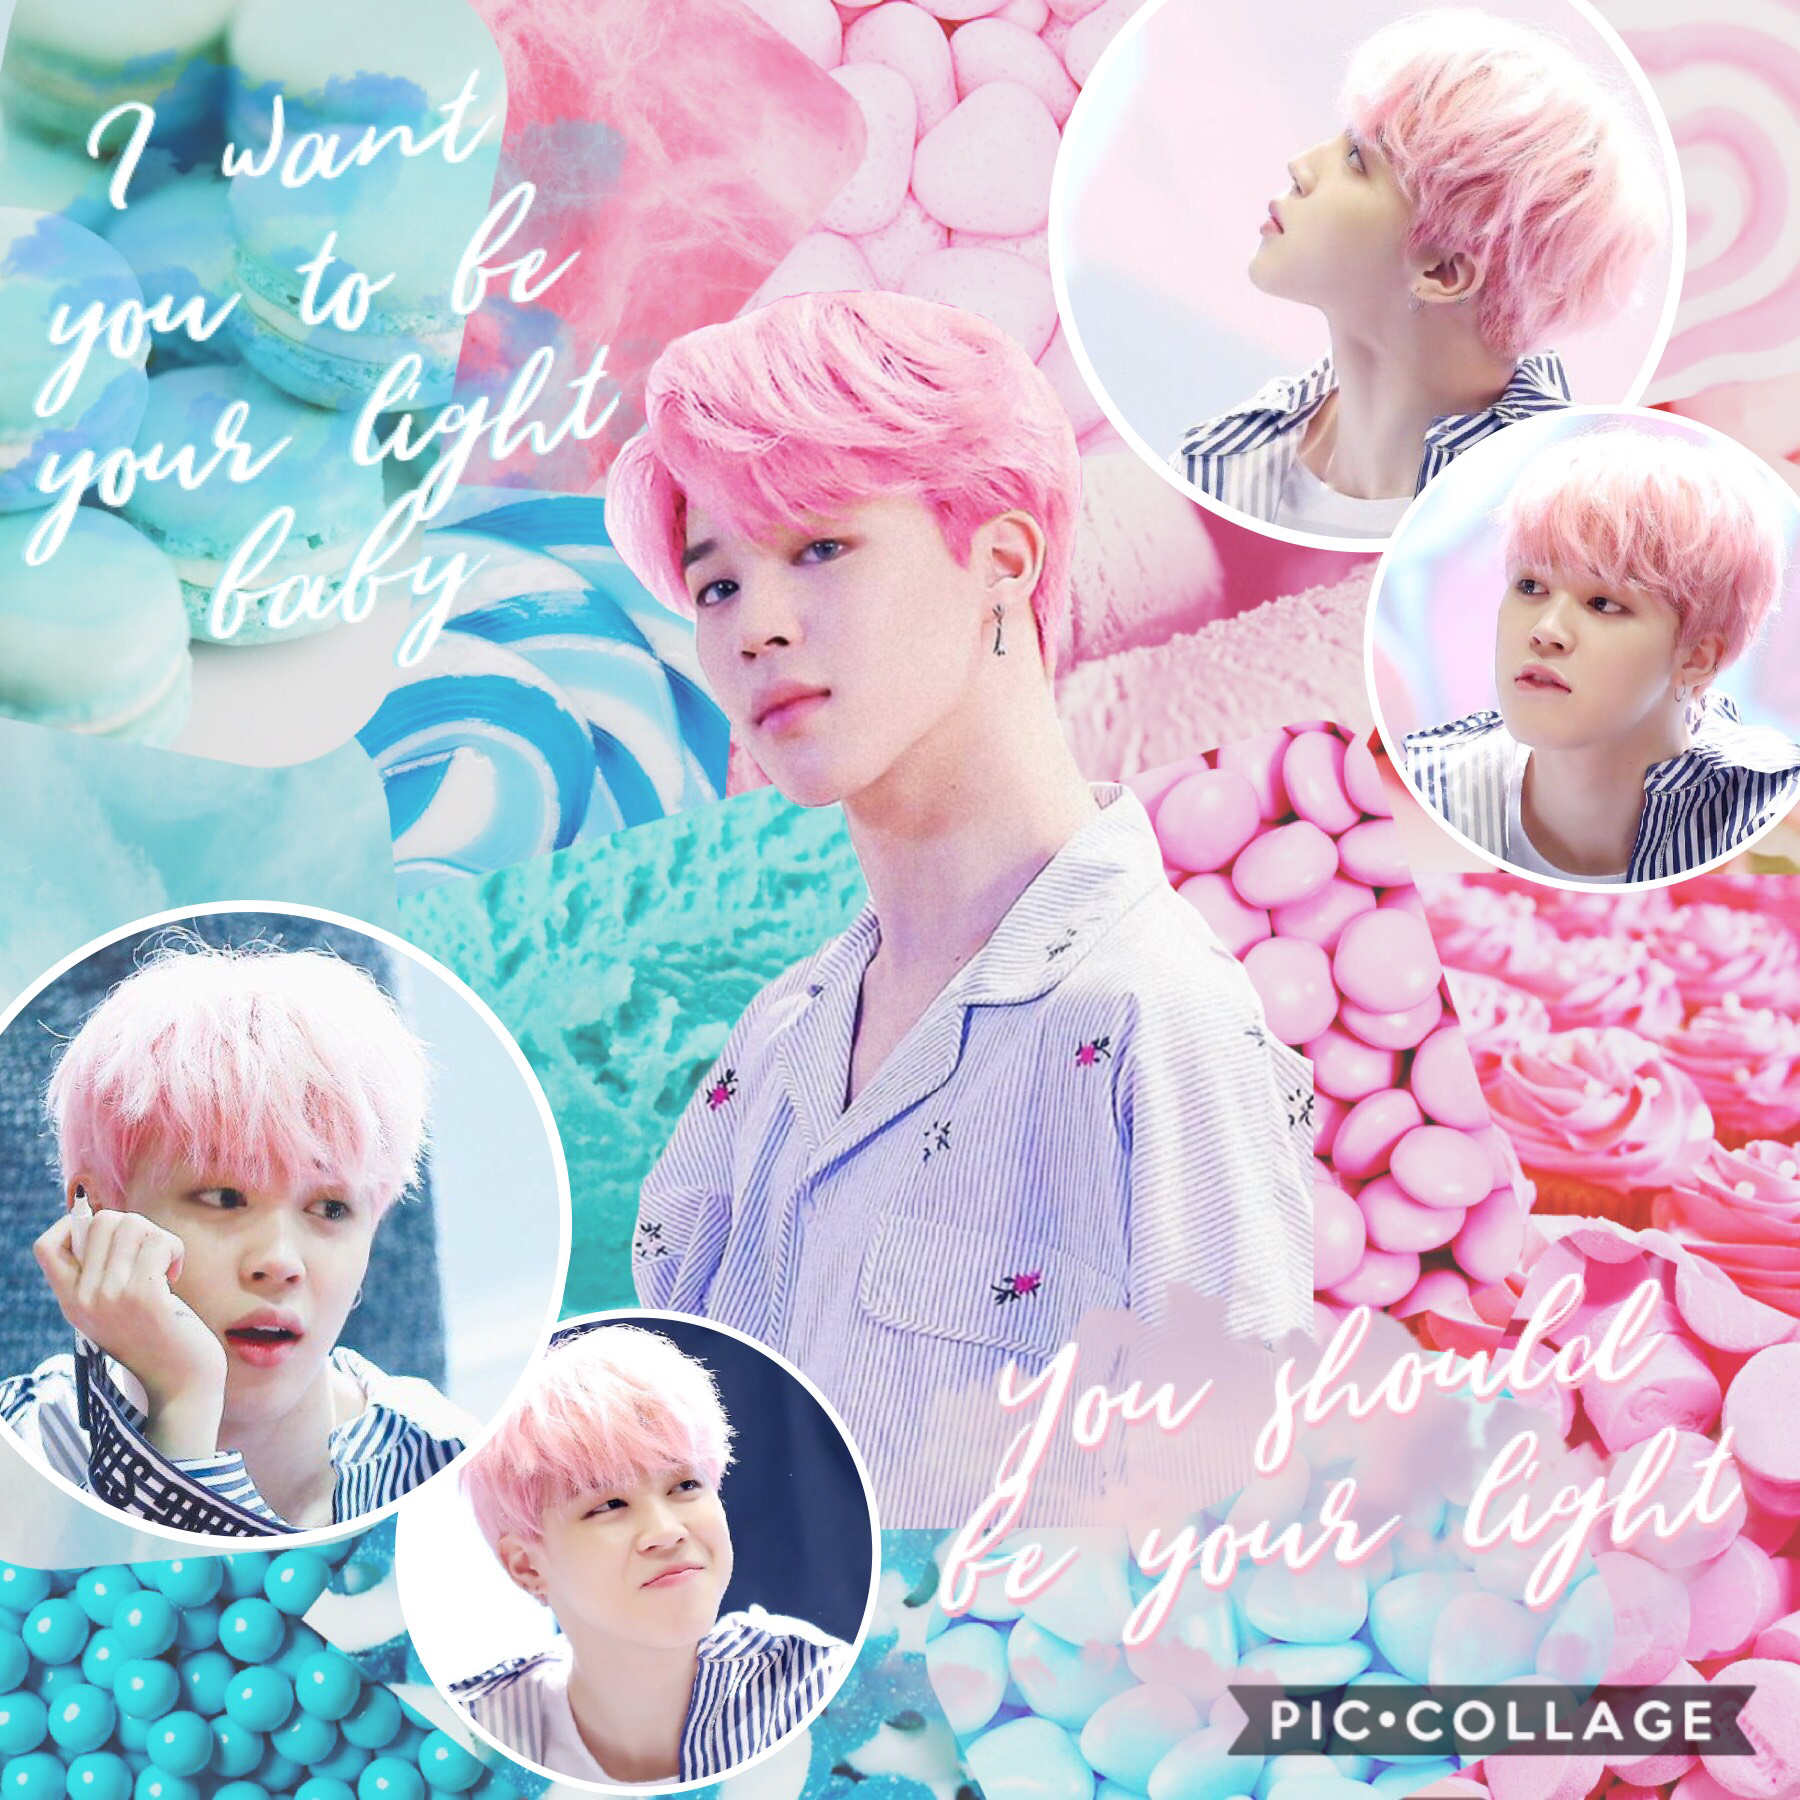 💗tap💗
-
-
I posted this a while ago for an edit competition but I wanted to post it here because I kinda liked it 😝
-
qotd: What’s your favourite hair colour on Jimin?
-
aotd: definitely pink